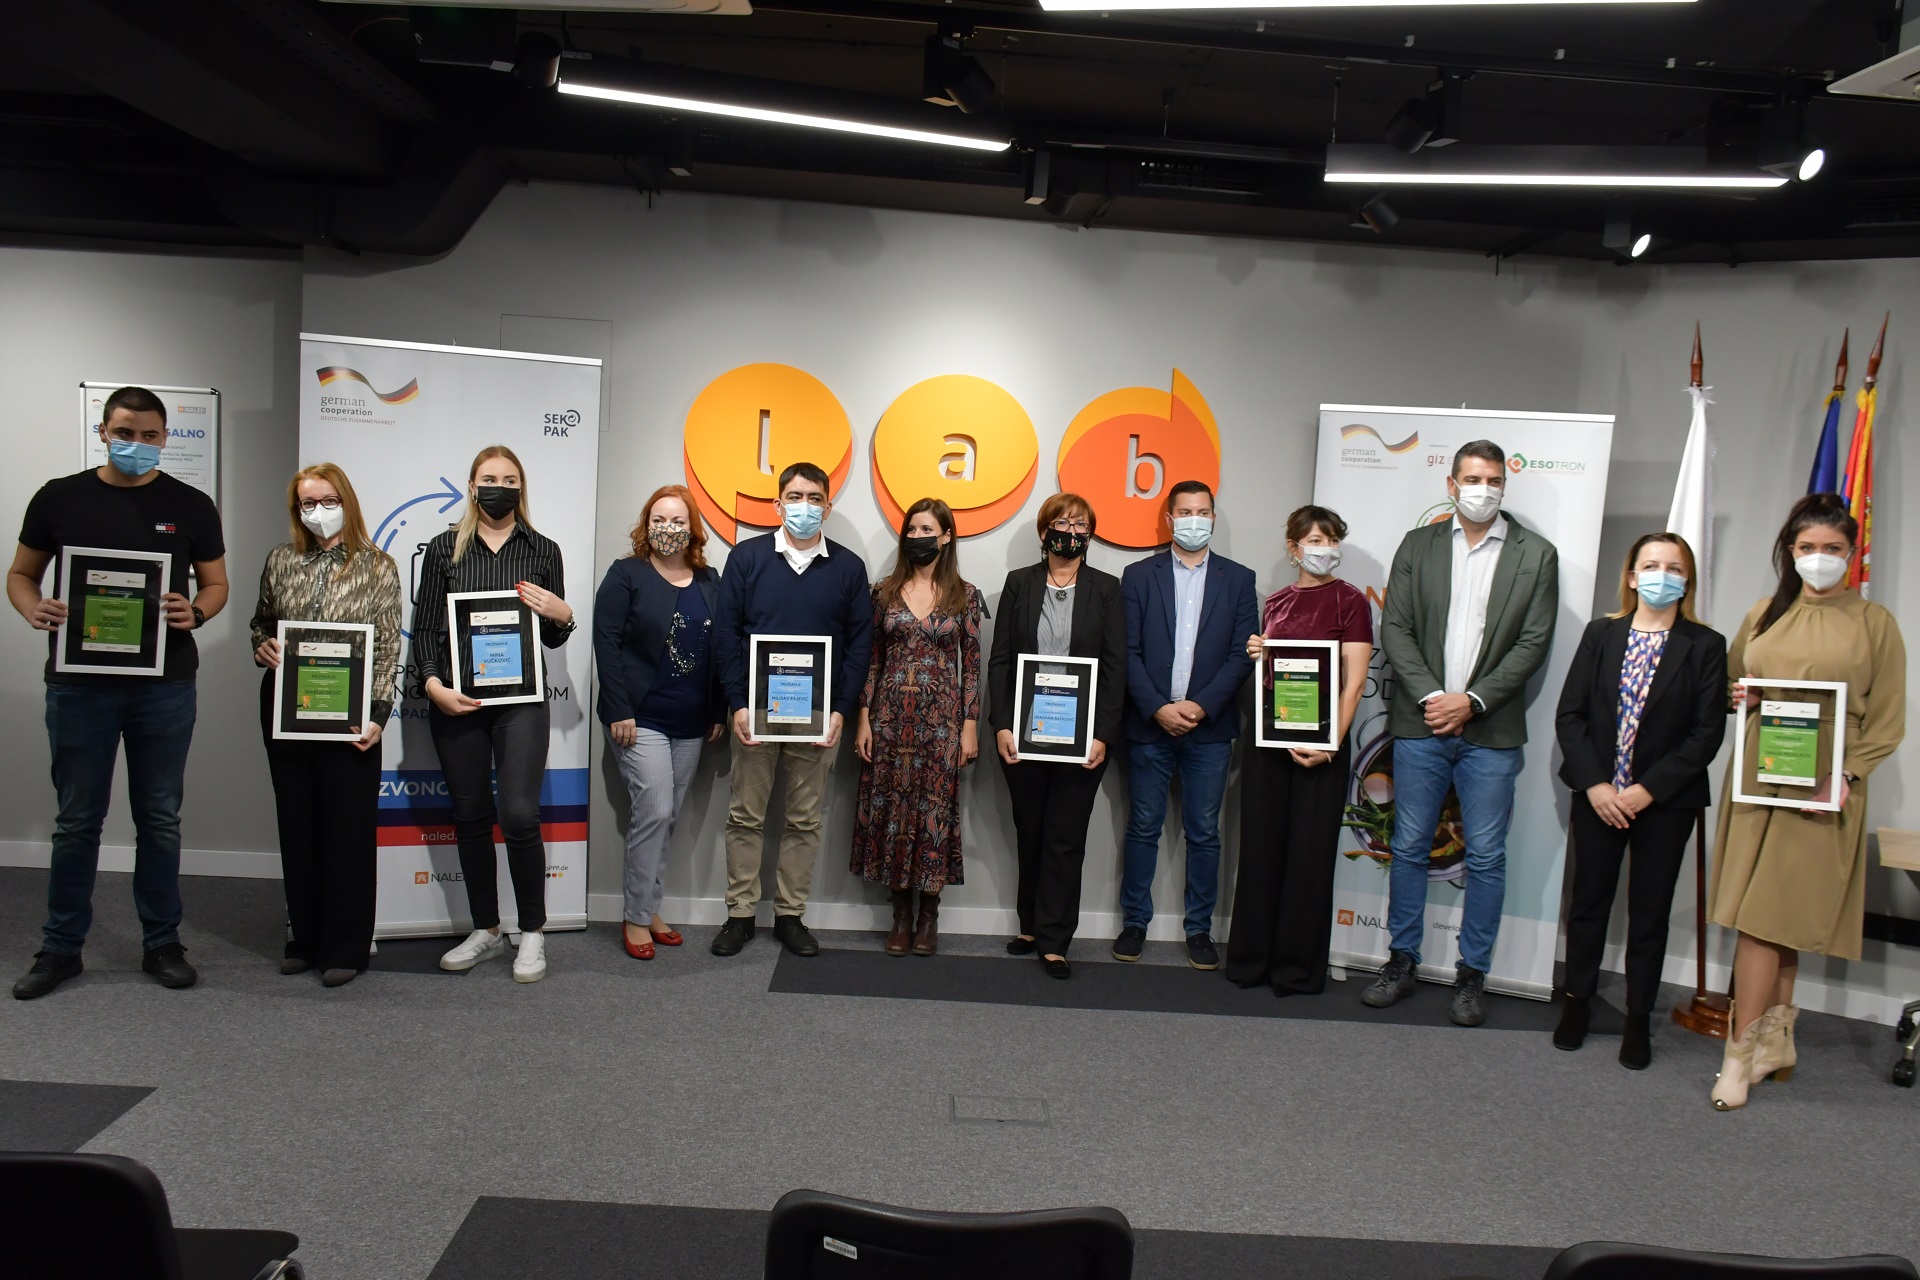 Recognitions were awarded to the winners of the prize competition for journalists and students